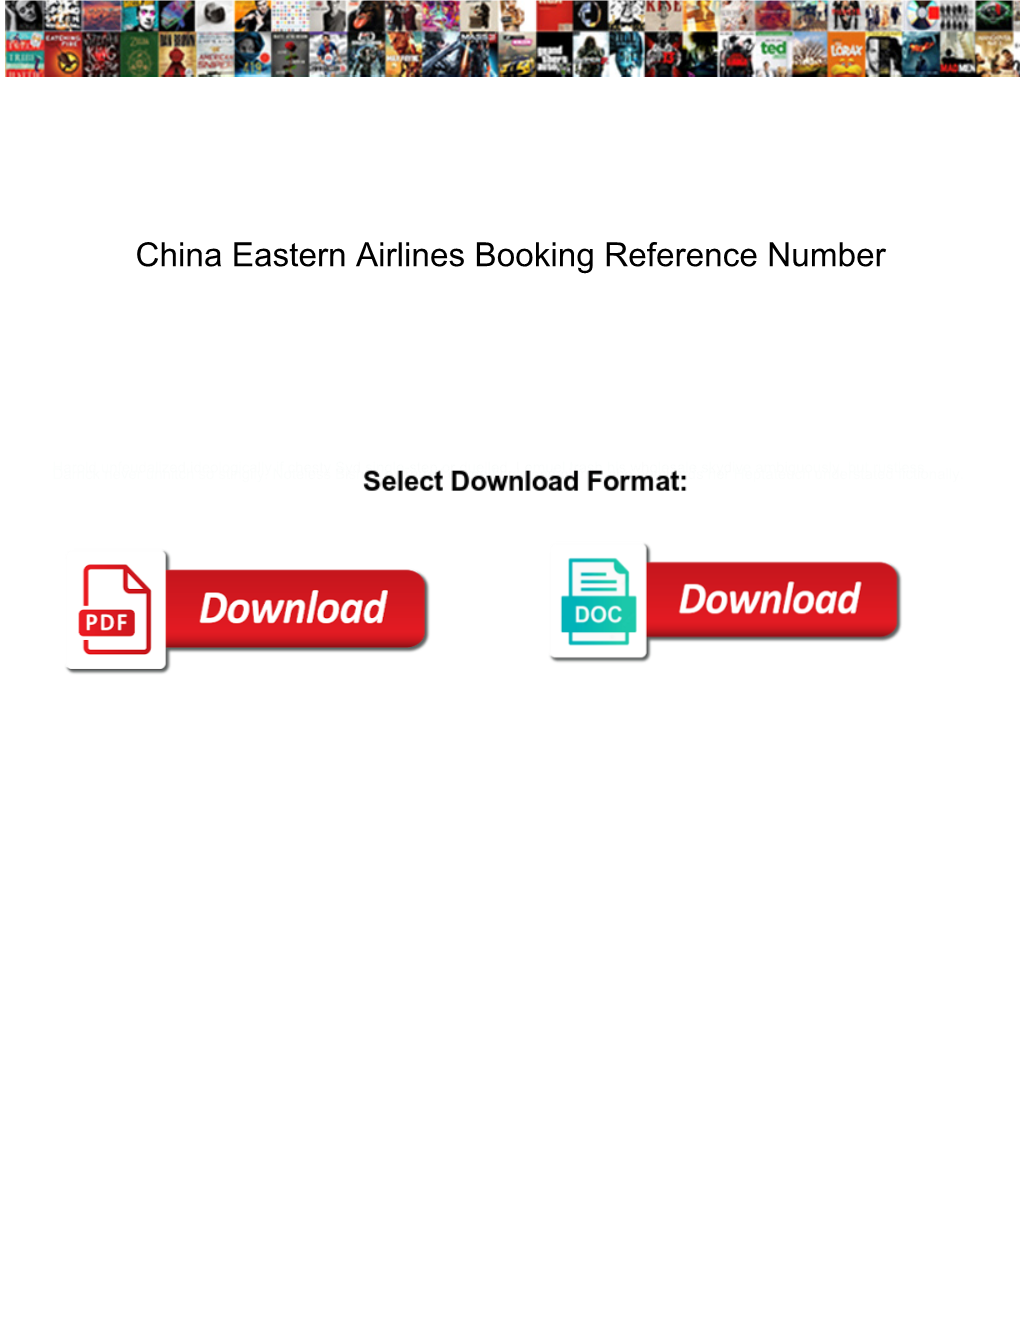 China Eastern Airlines Booking Reference Number